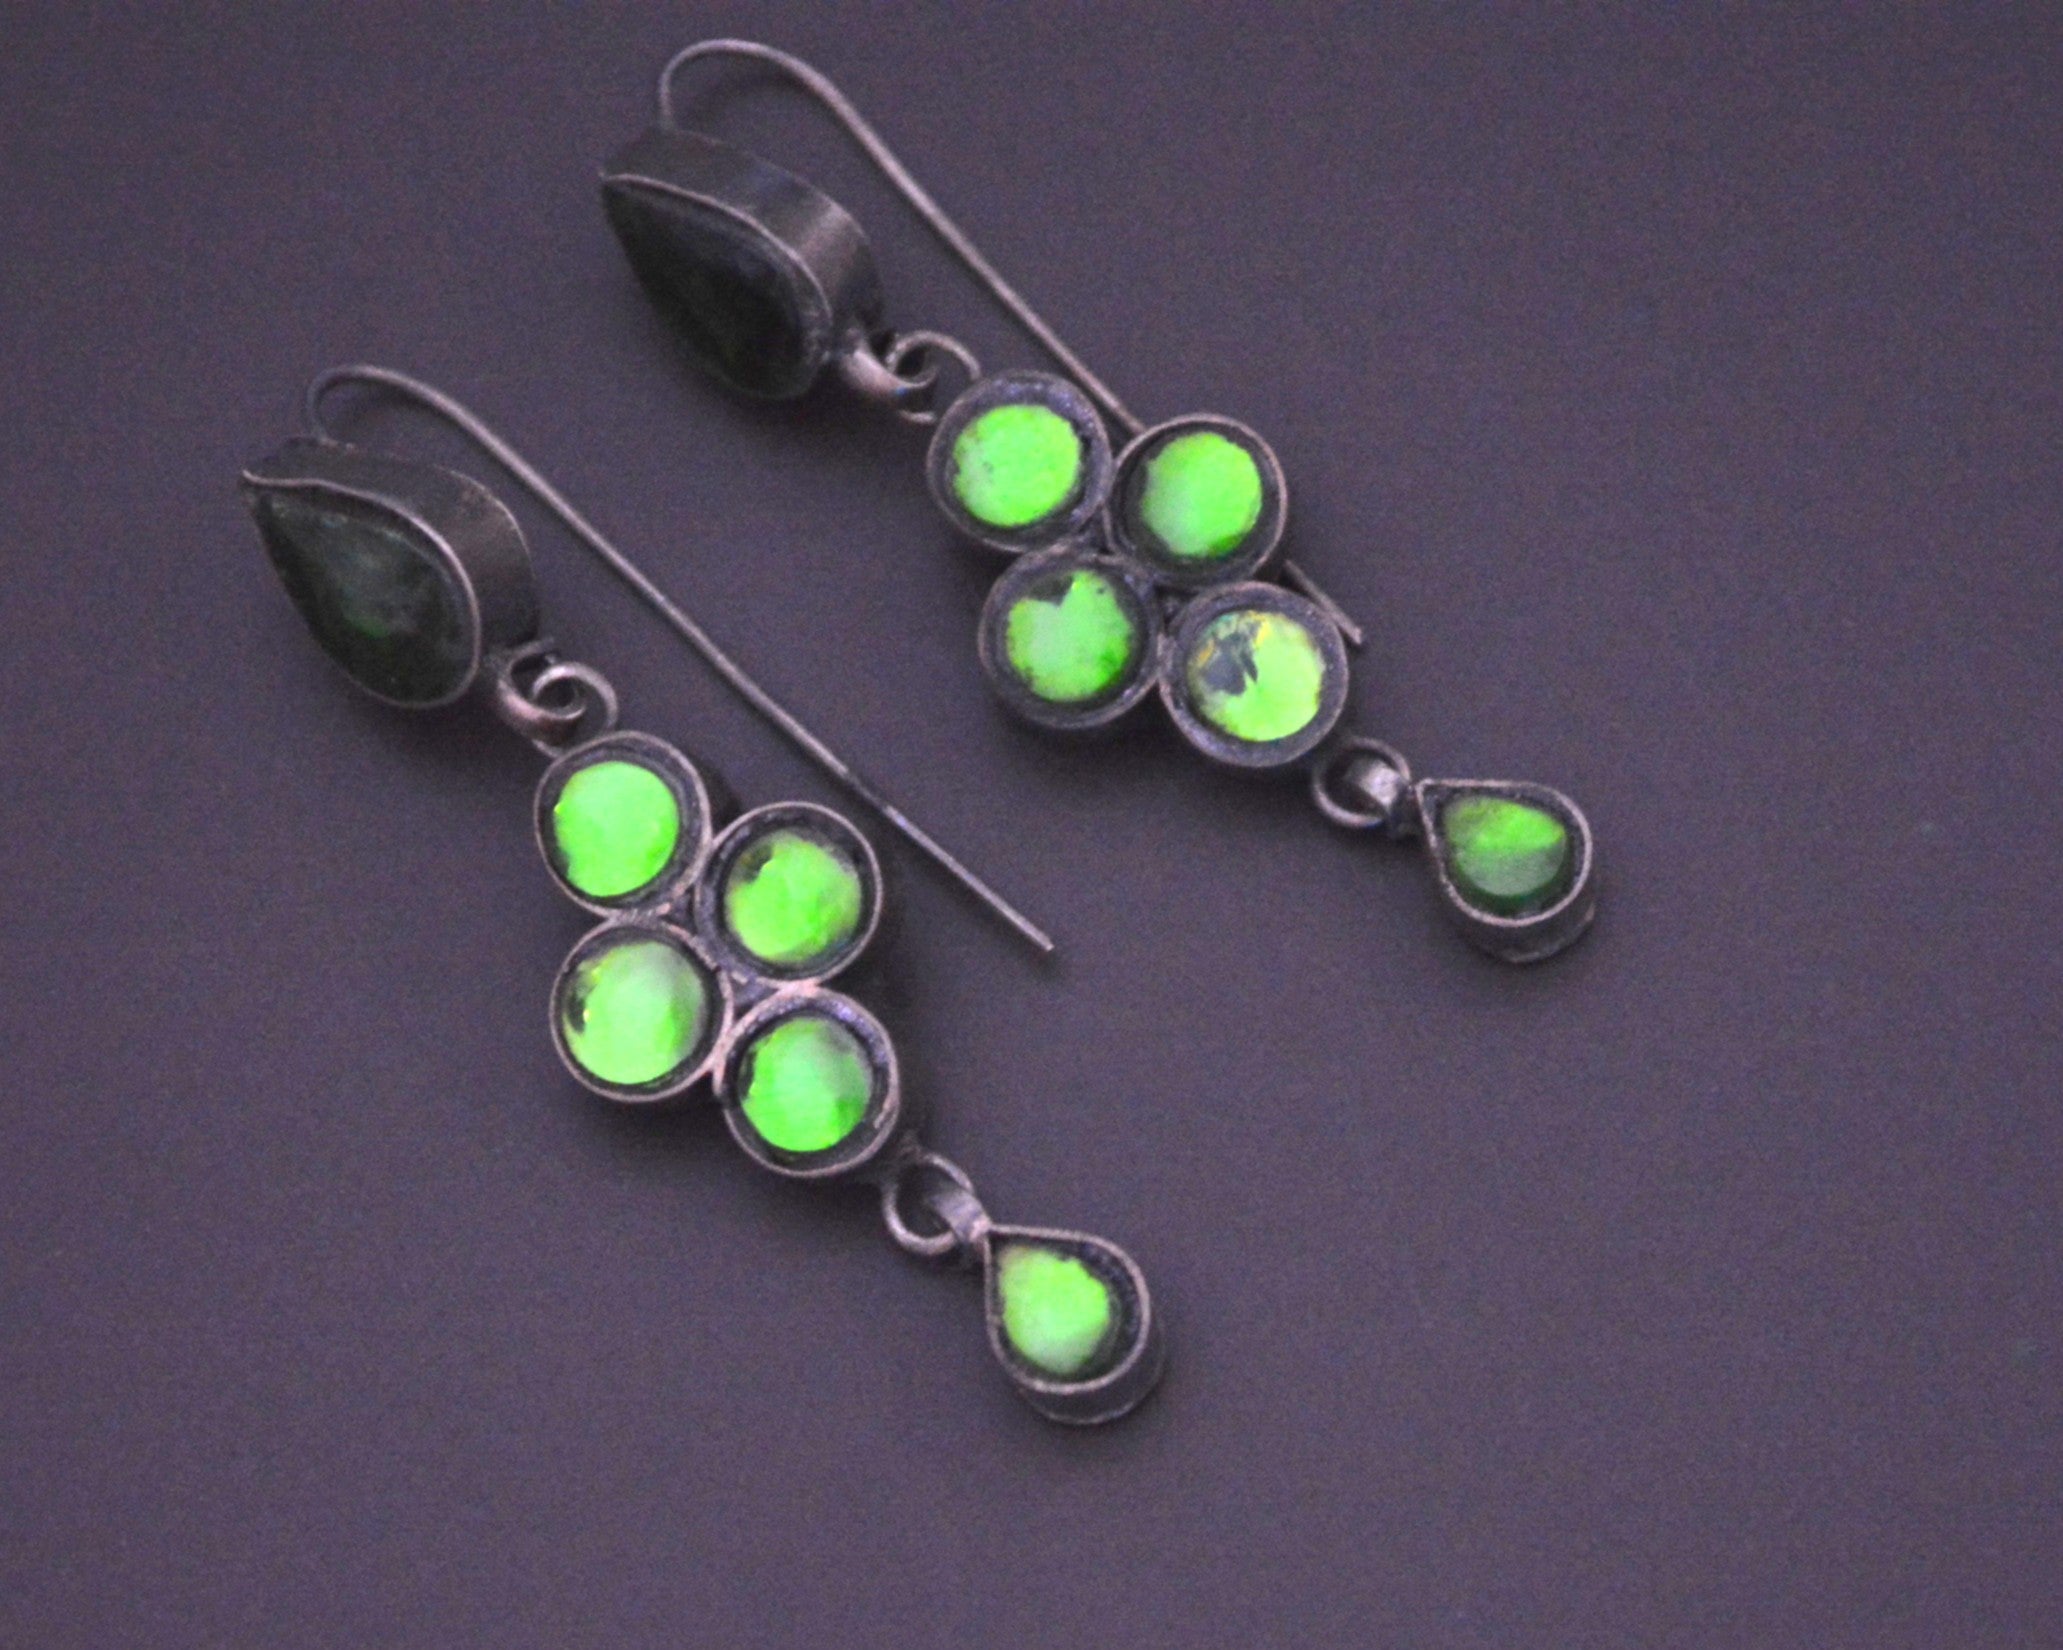 Rajasthani Earrings with Green Glass